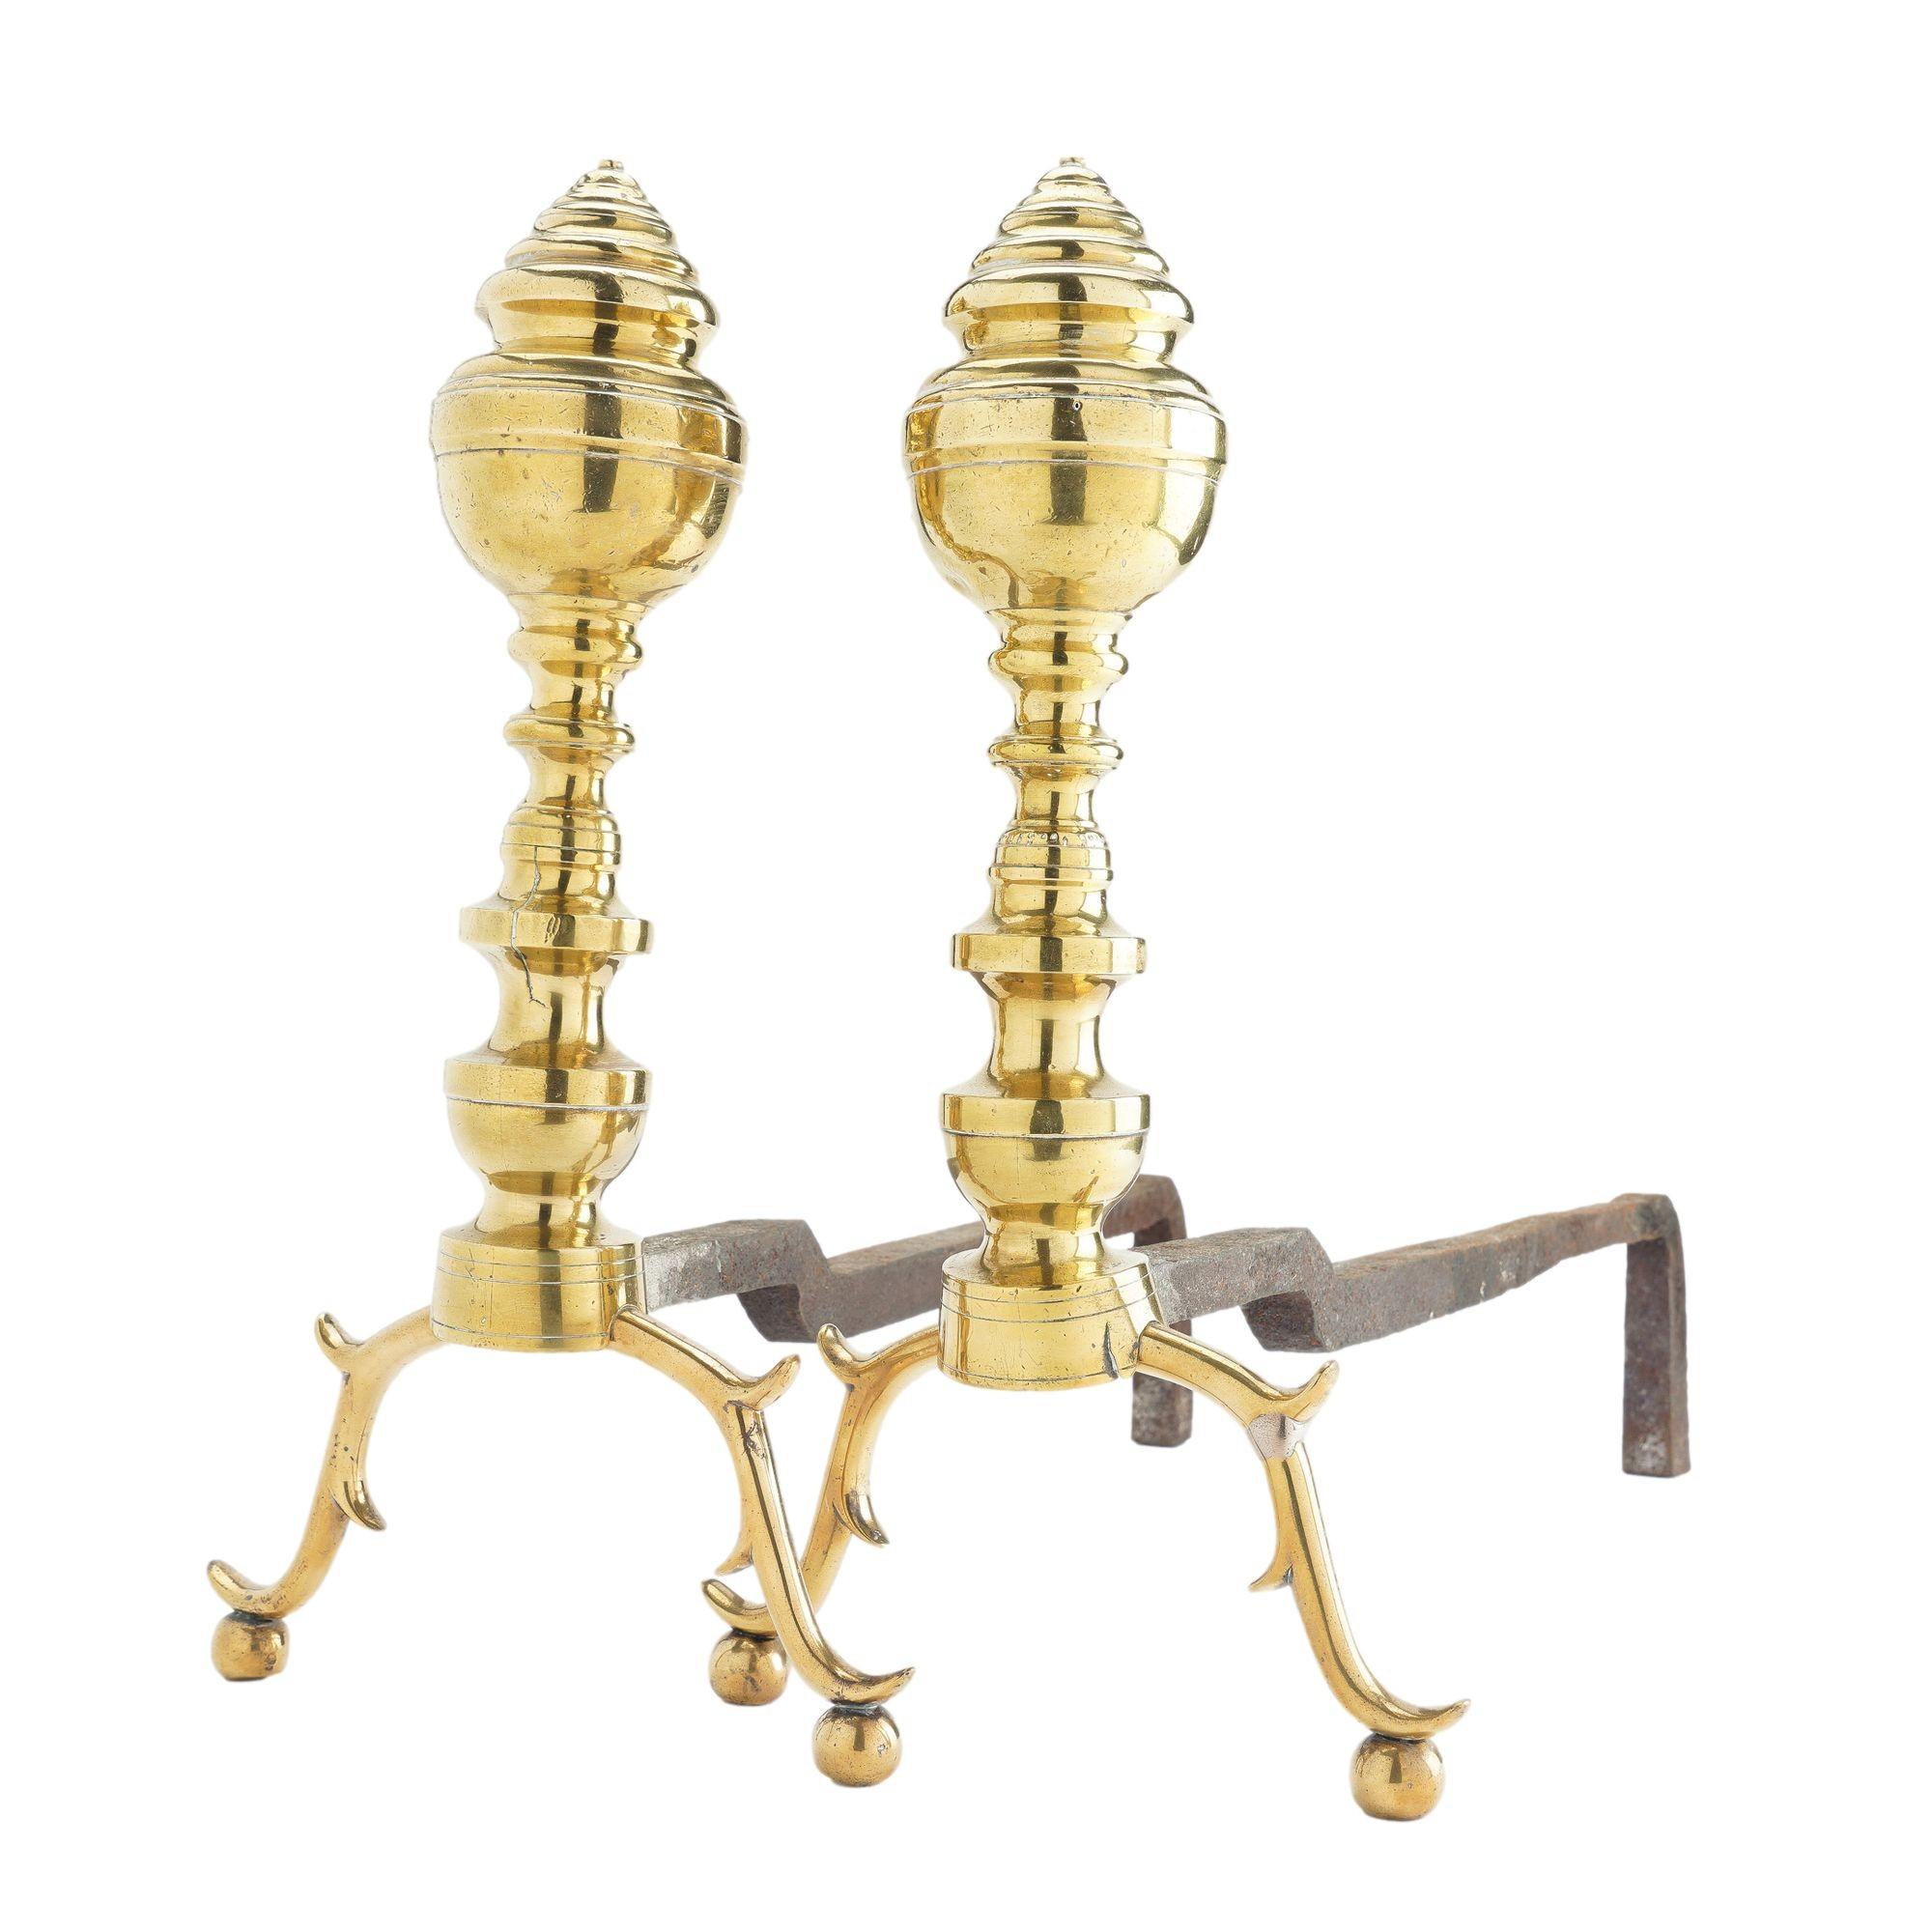 Pair of generously proportioned American cast brass beehive andirons with arched spur legs on ball feet. The brass castings support a forged iron log rest.

Boston, circa 1815-25.